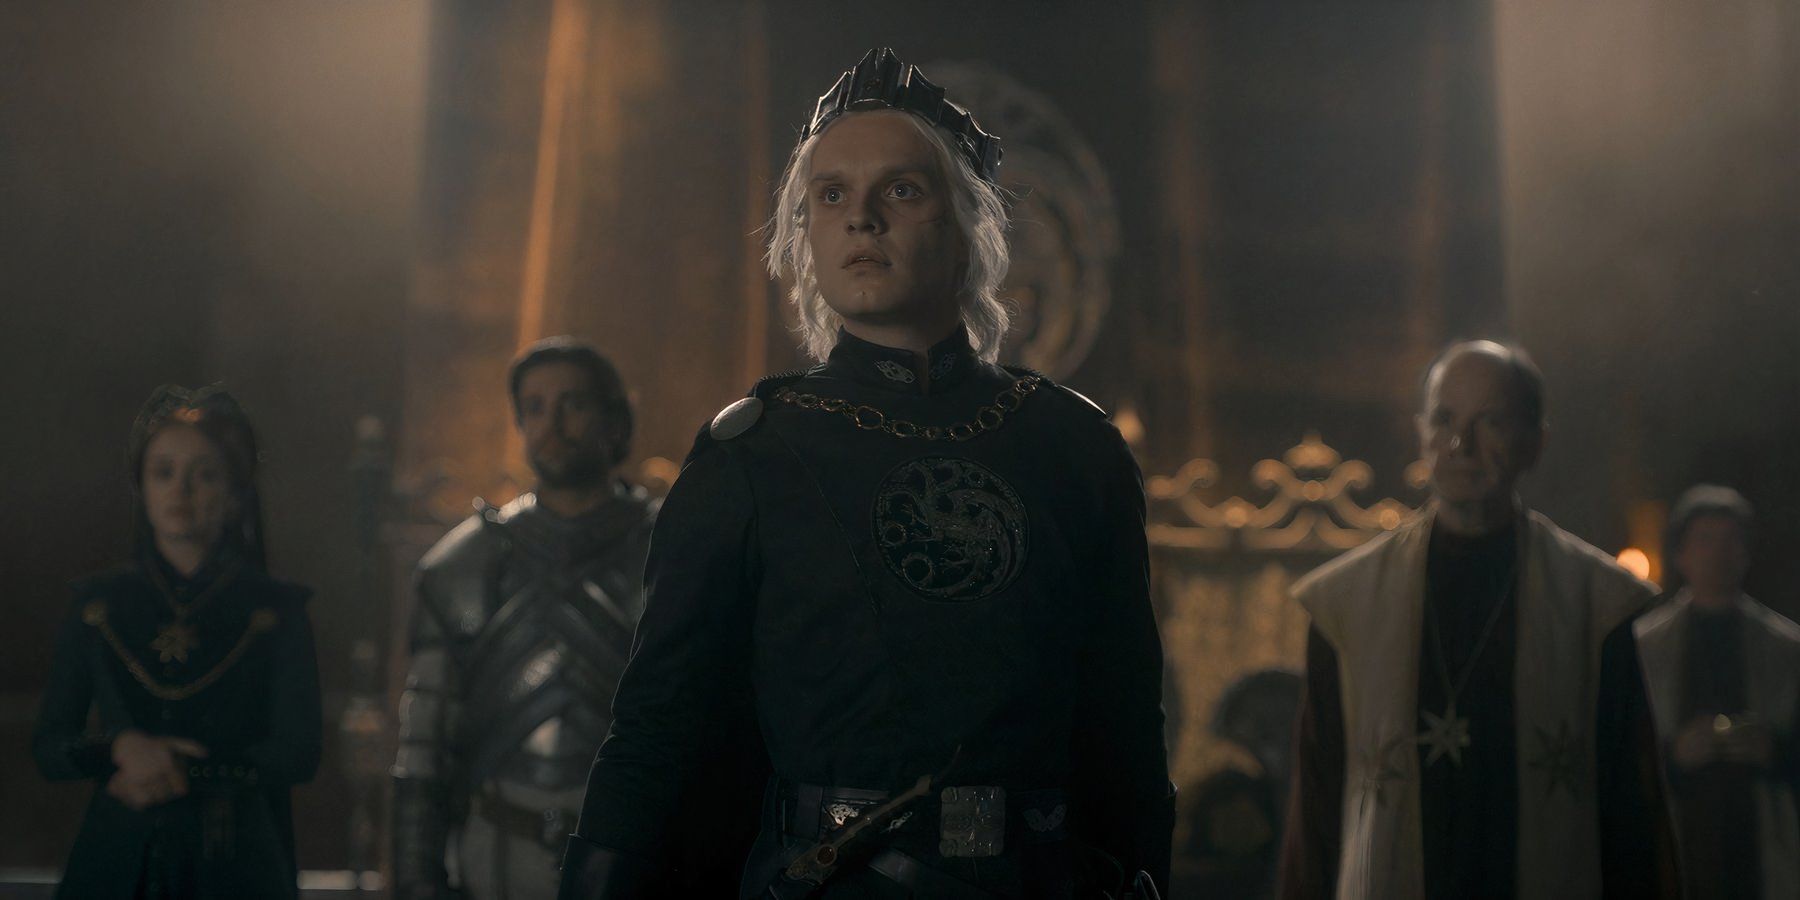 Alicent Hightower and Criston Cole watching King Aegon Targaryen being crowned in House of the Dragon